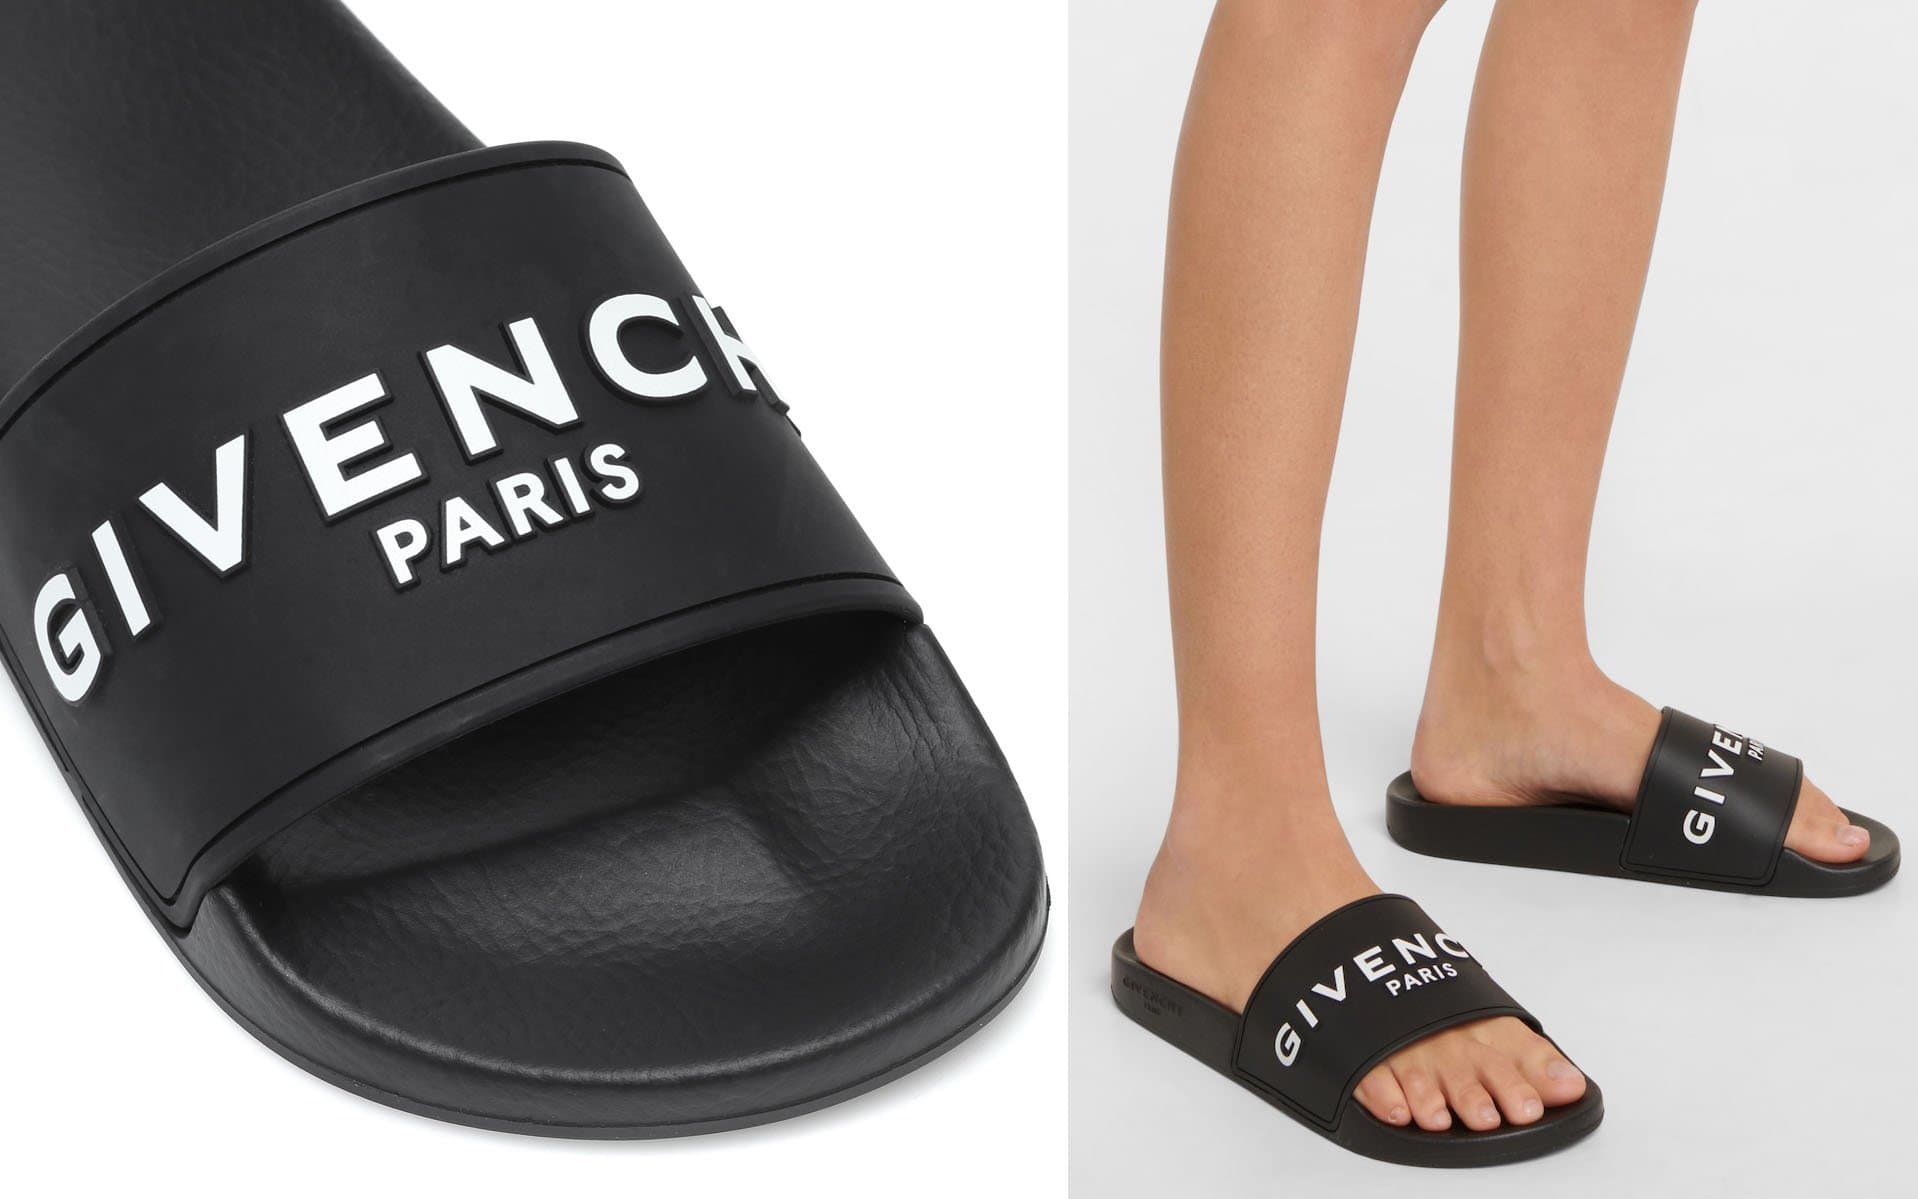 These affordable and comfy Givenchy slides are perfect for day-to-day wear